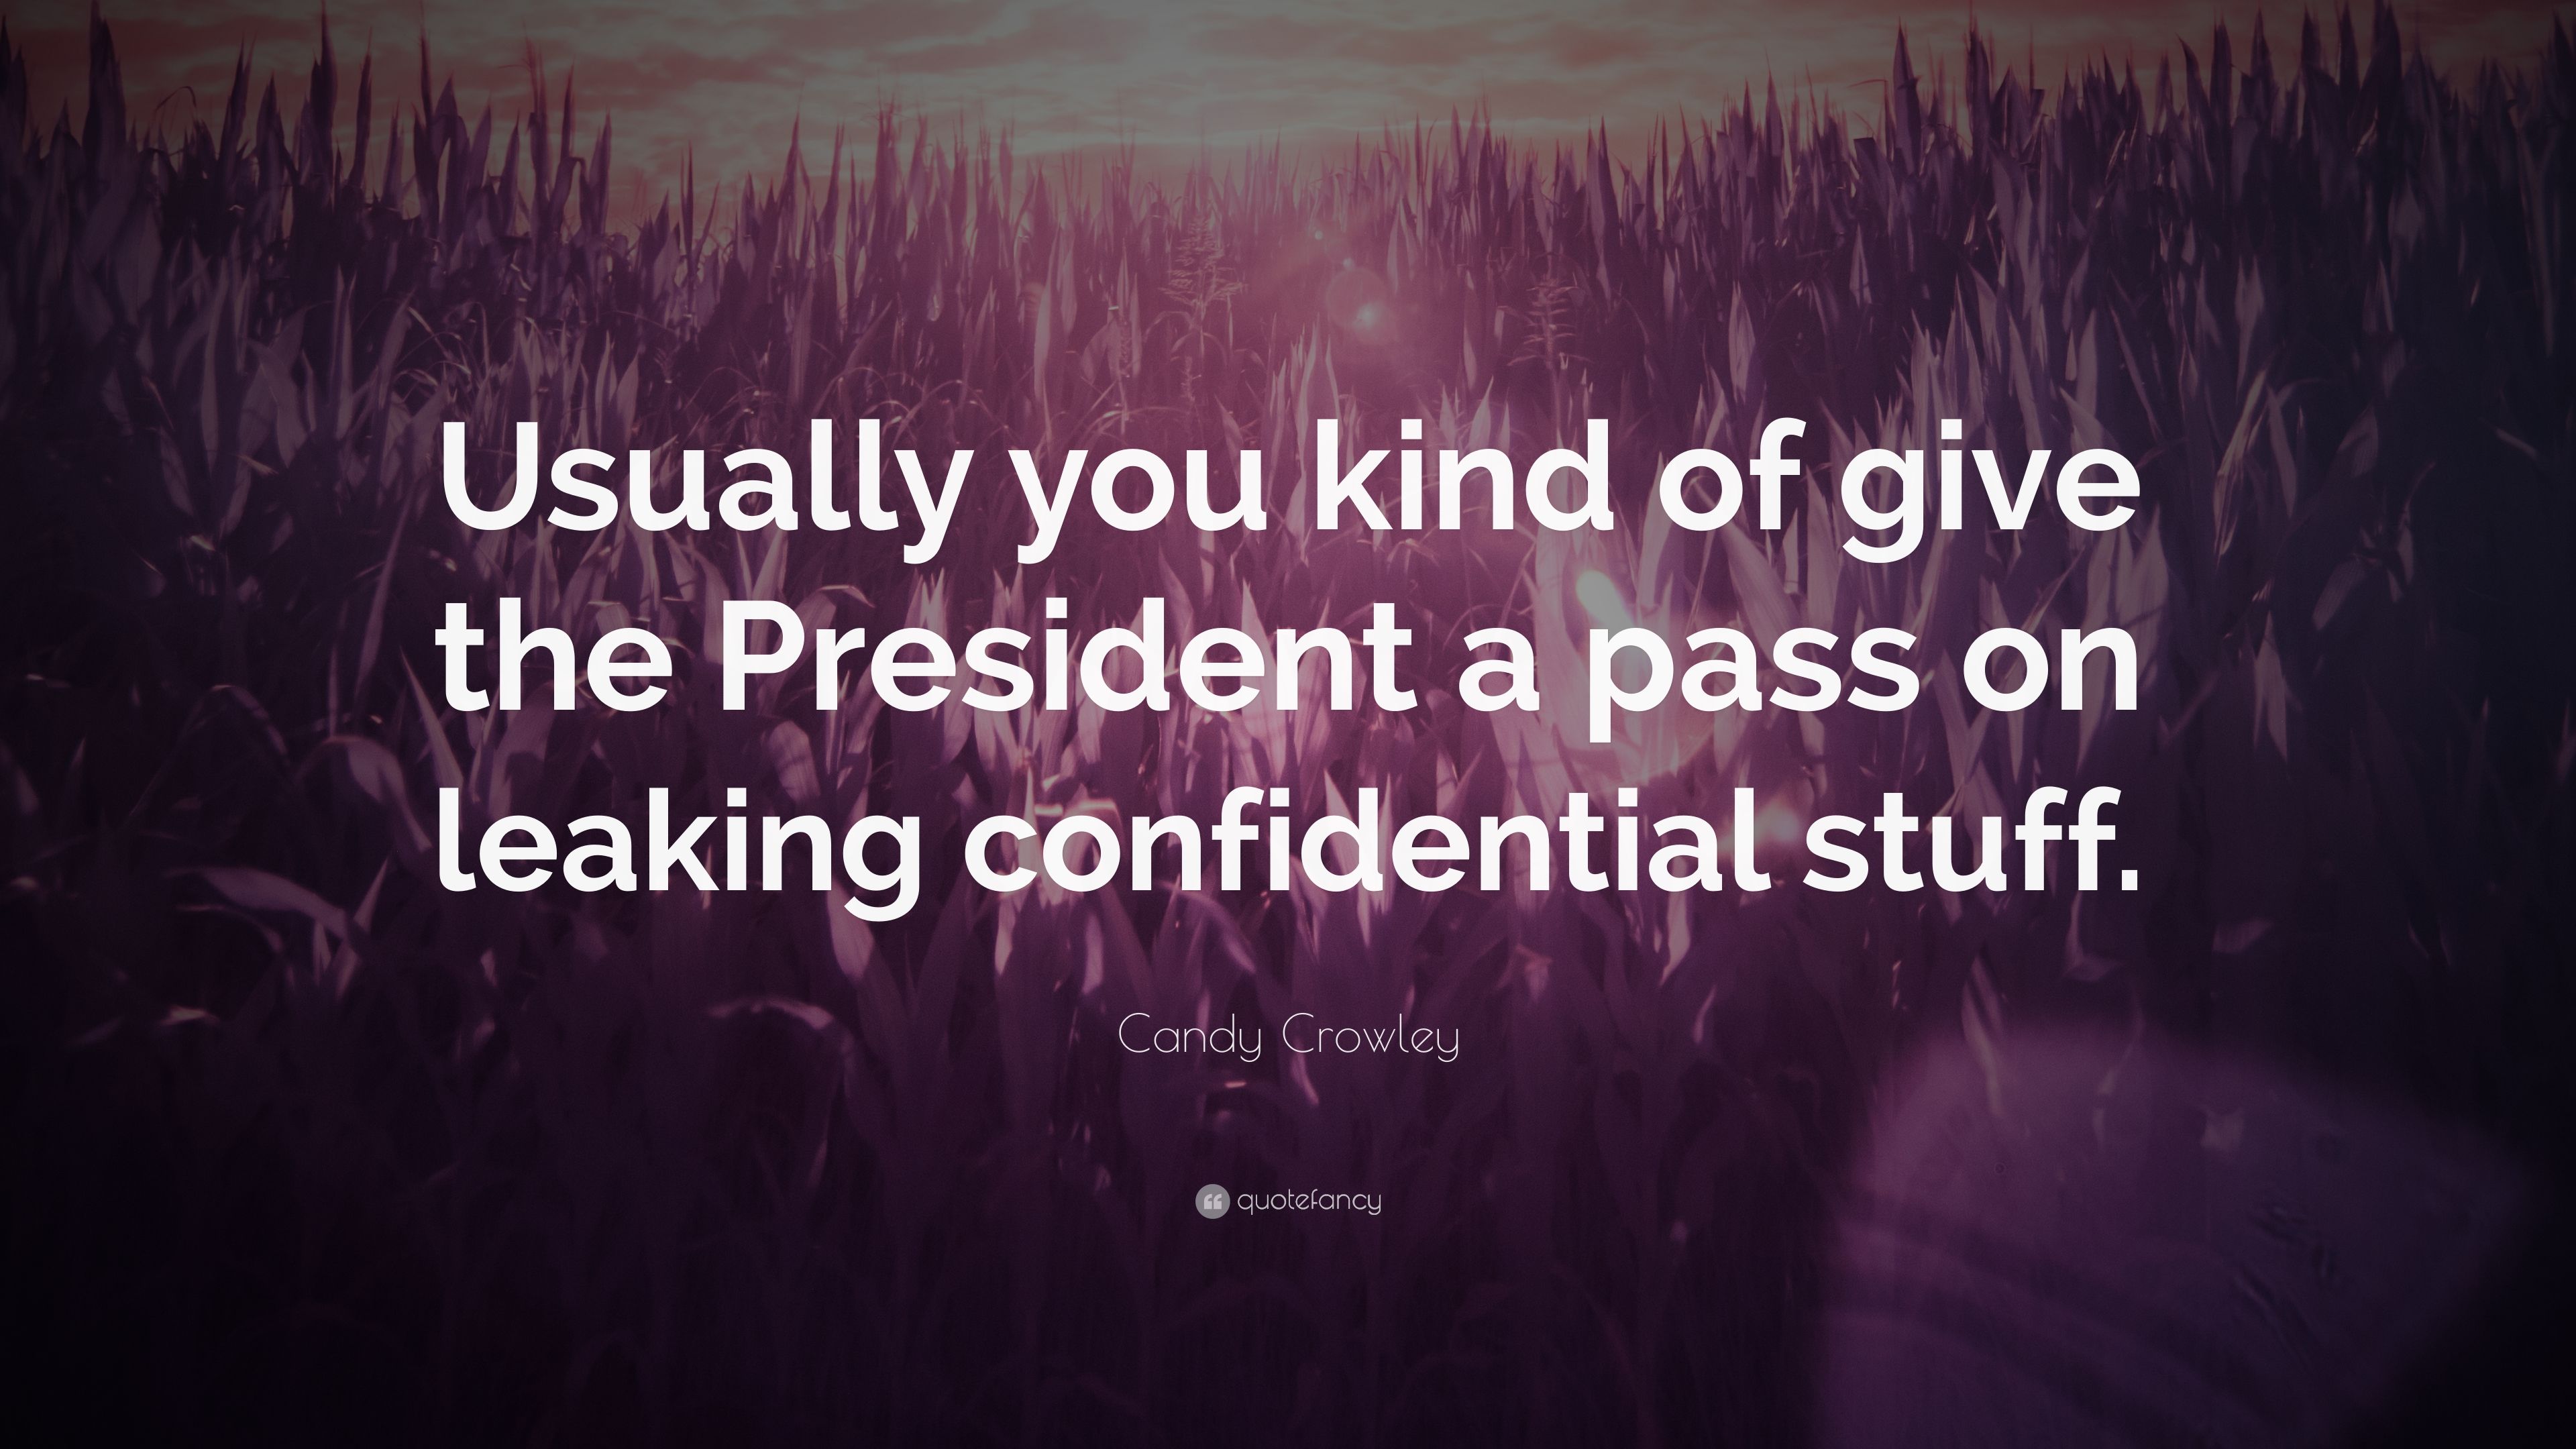 Candy Crowley Quote: “Usually you kind of give the President a pass on leaking confidential stuff.” (7 wallpaper)